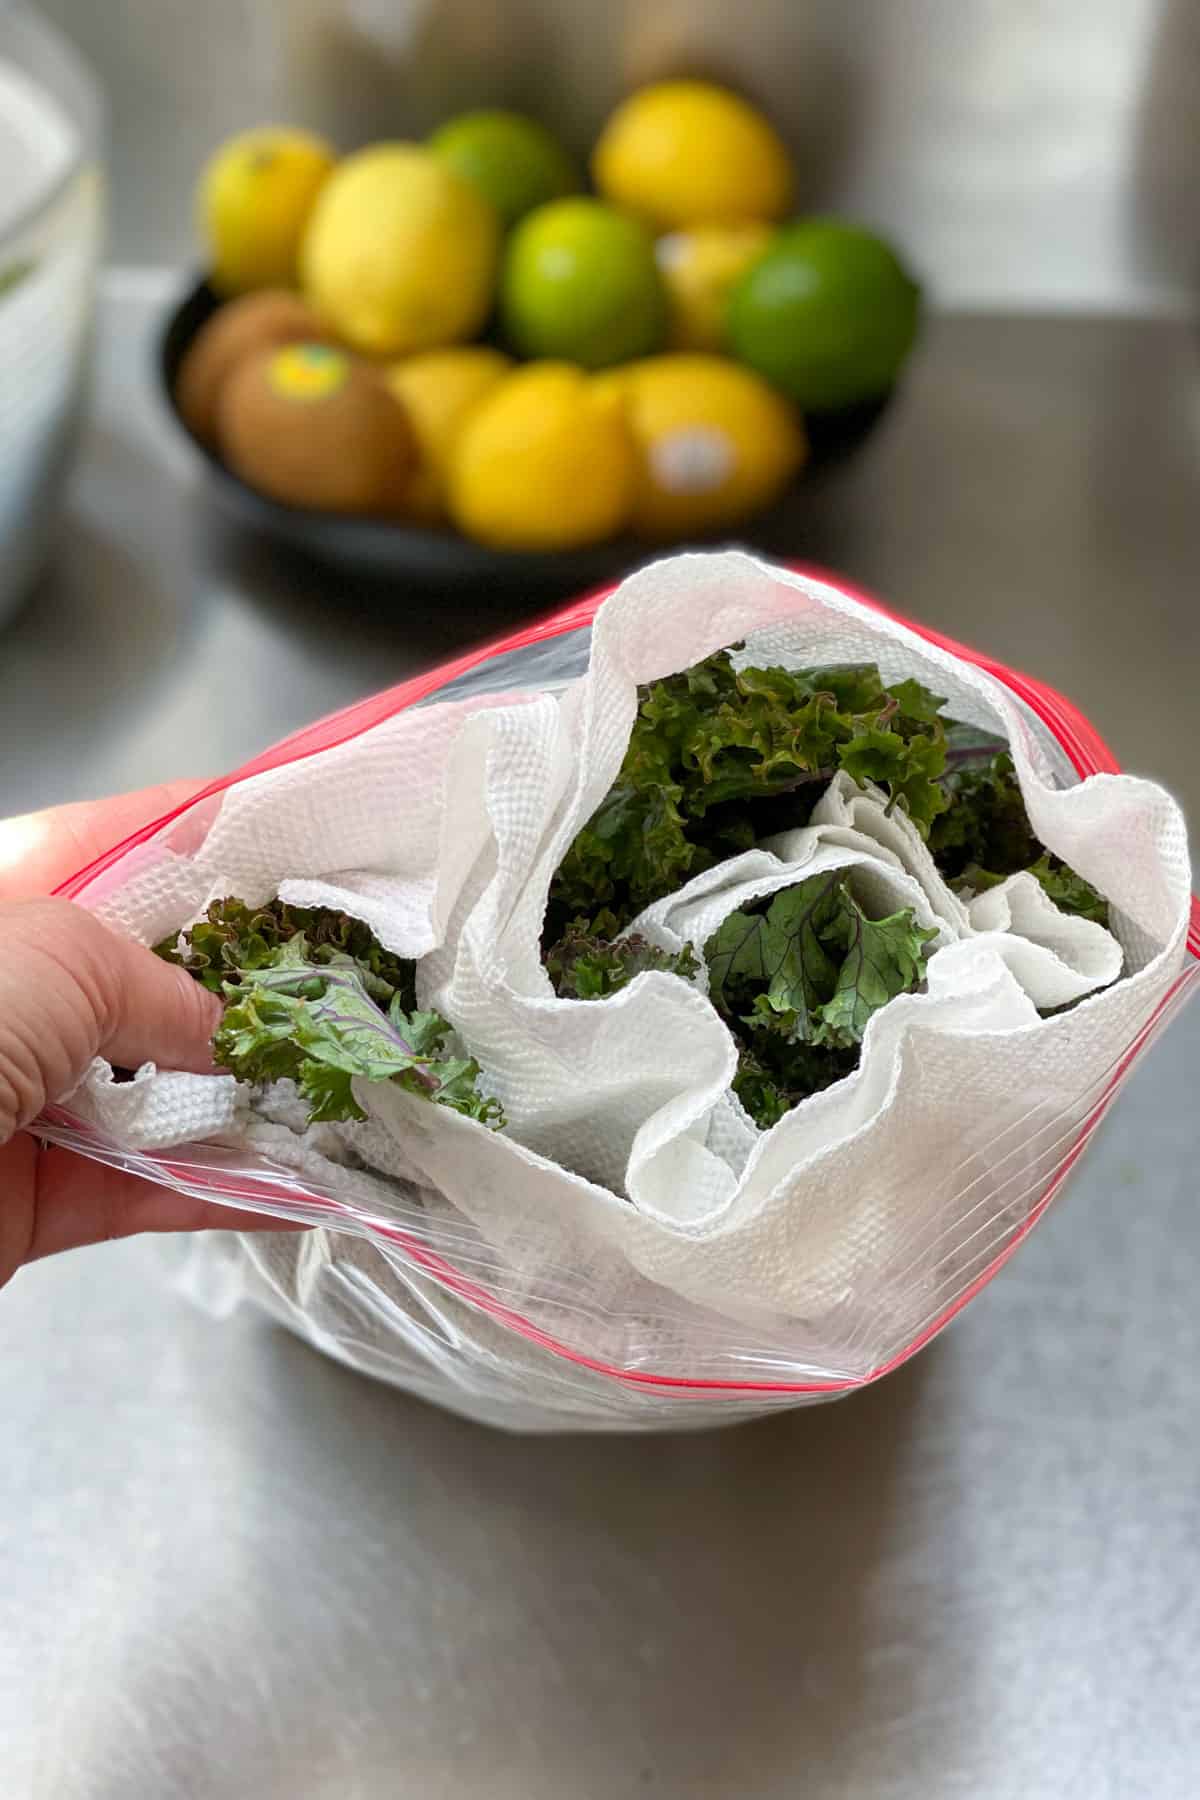 A hand holding an open plastic ziplock bag containing kale leaves rolled in paper towels